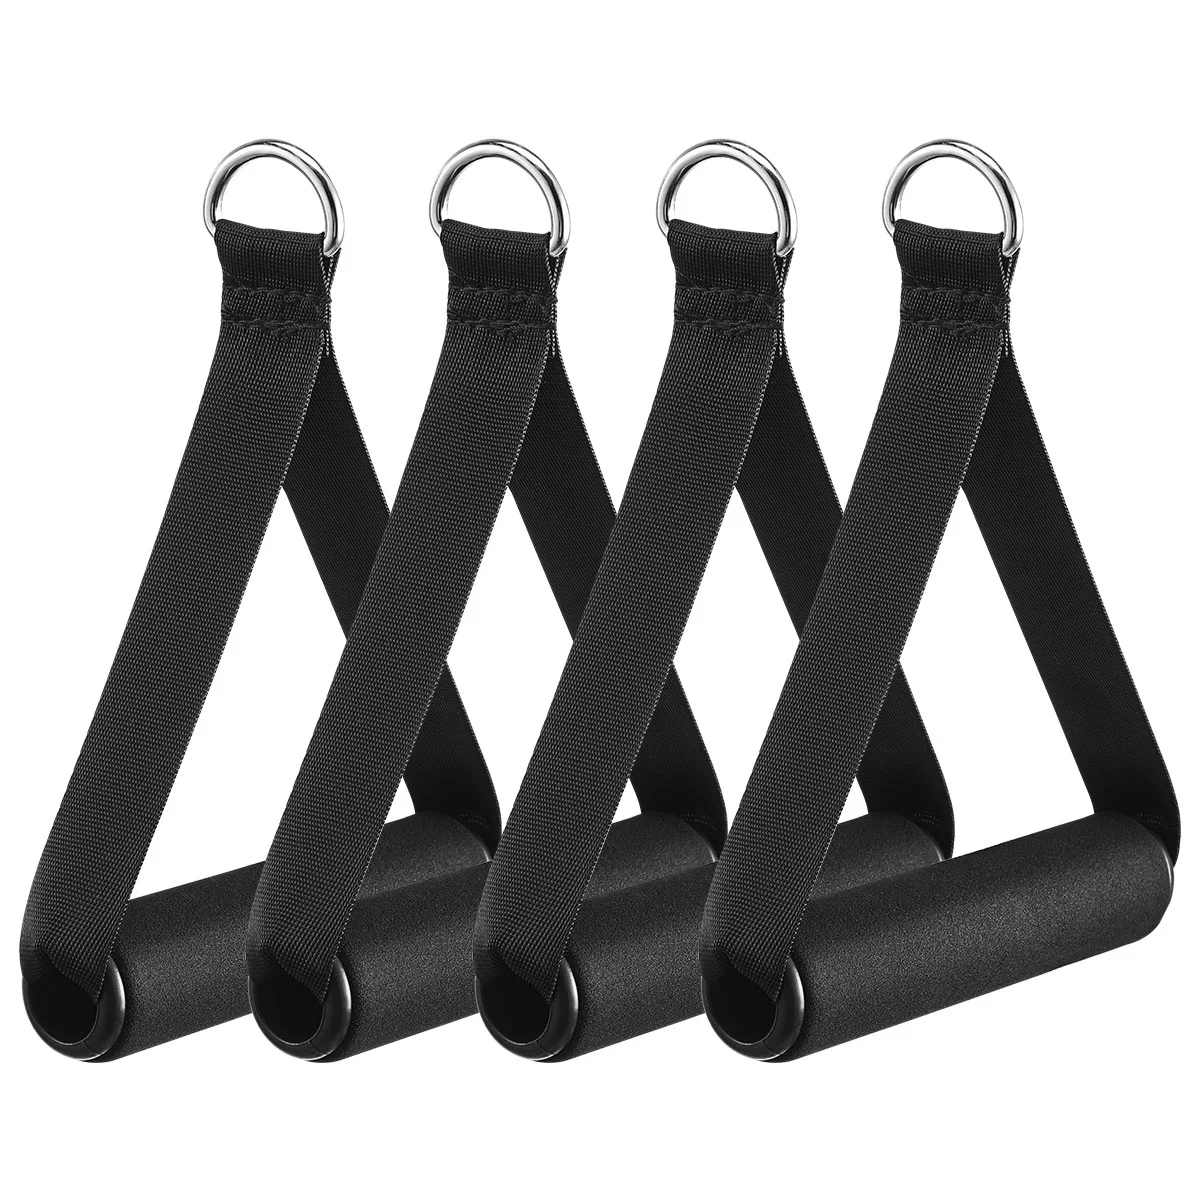 

4Pcs Single- Grip Handles with Carabiner Clips Handle Exercise Handles for Yoga Exercise Workout Gym Training Arms Strength